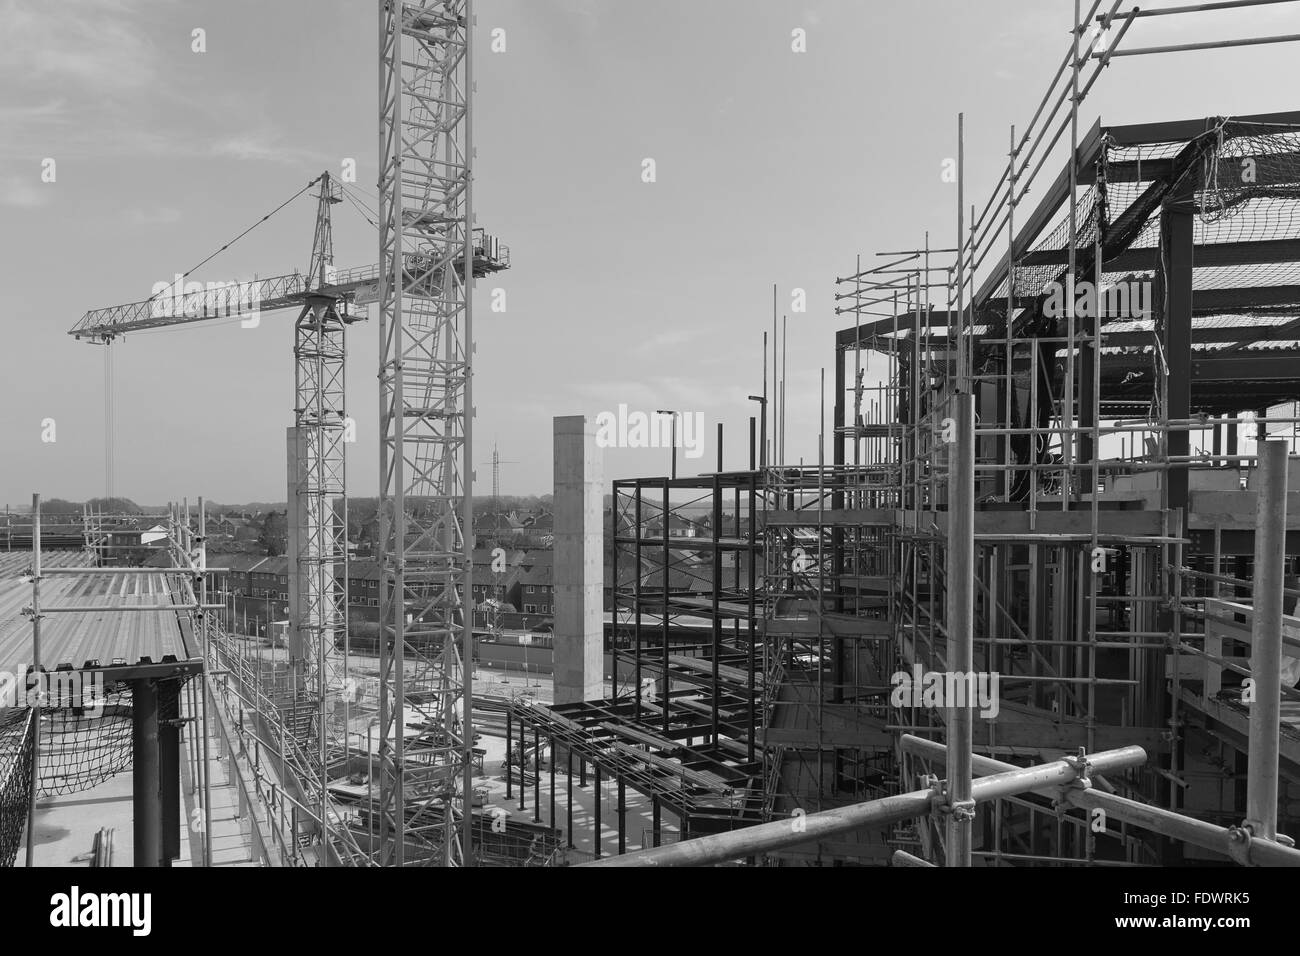 Apri 2015 - Dorchester, England: A construction site with concrete slabs built, steel framing and scaffolding Stock Photo